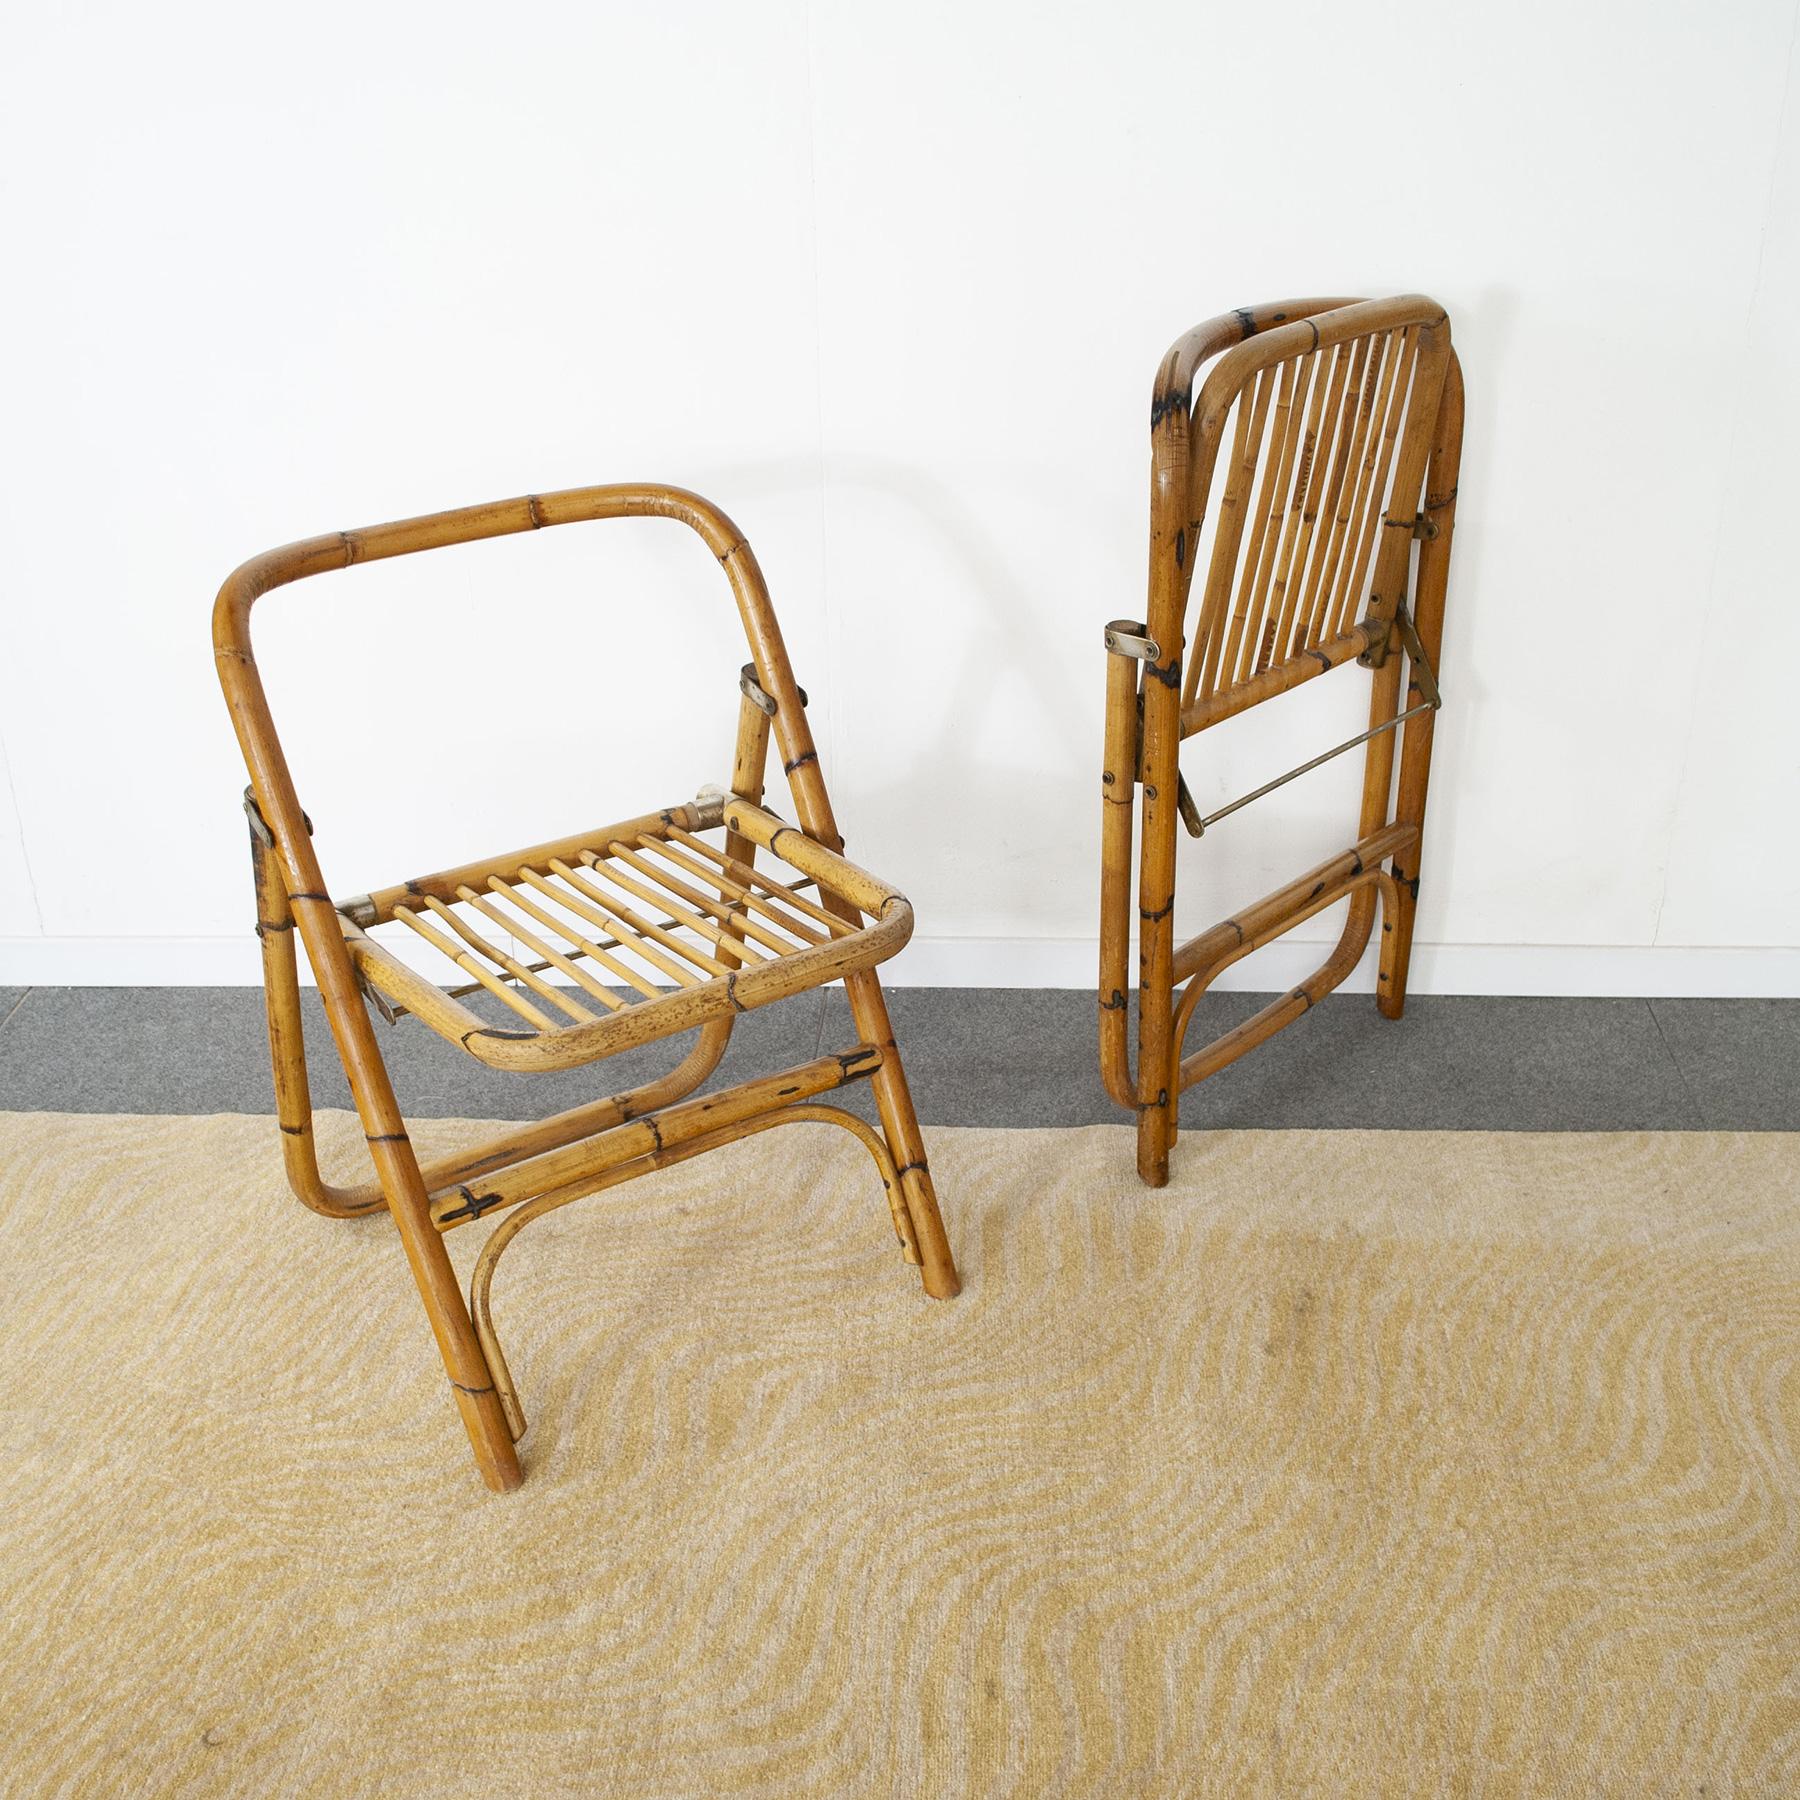 Dal Vera Italian Mid Century Pair of Bamboo Chairs For Sale 1